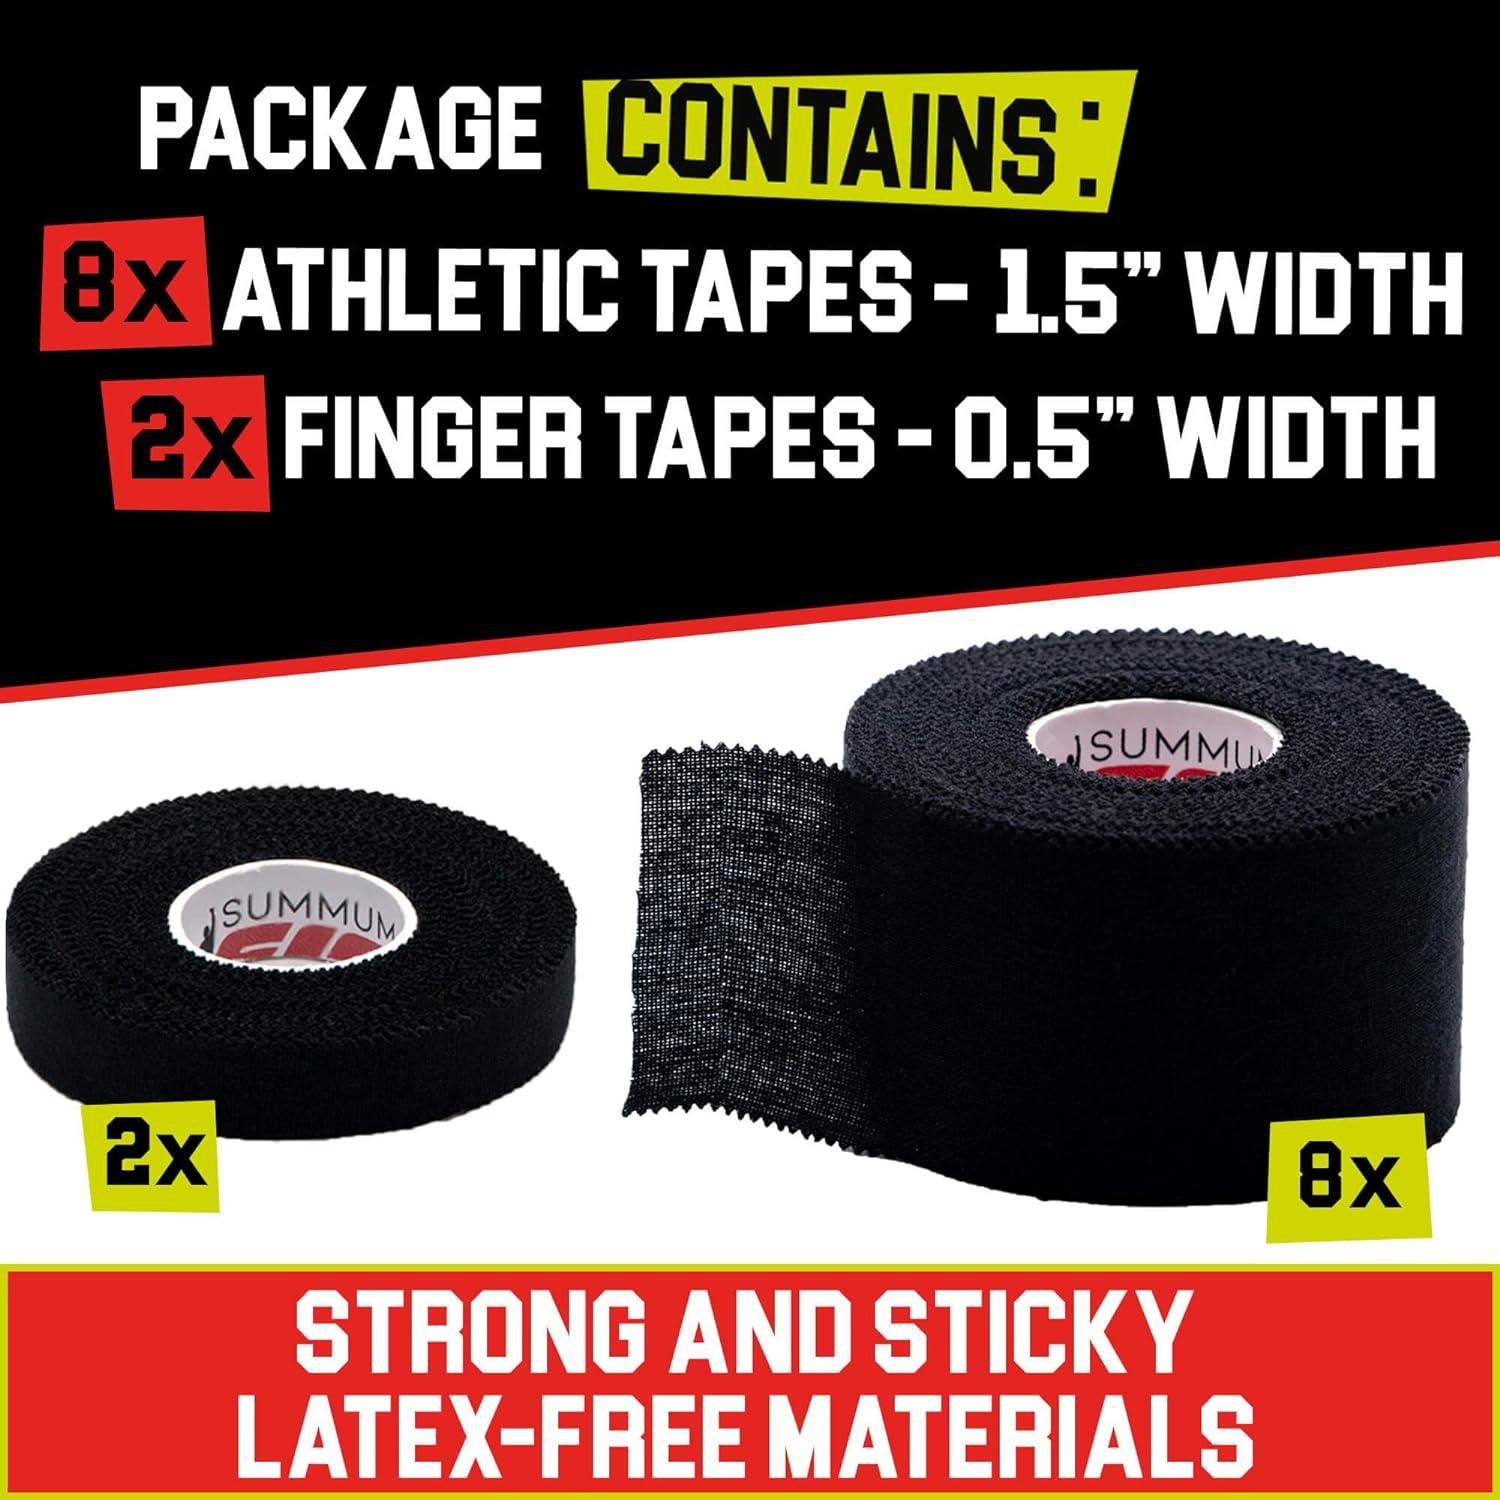 Summum Fit White Athletic Tape Extremely Strong: 8 Rolls + 2 Finger Tape.  Easy to Apply & No Sticky Residue. Sports Tape for Boxing, Football, BJJ